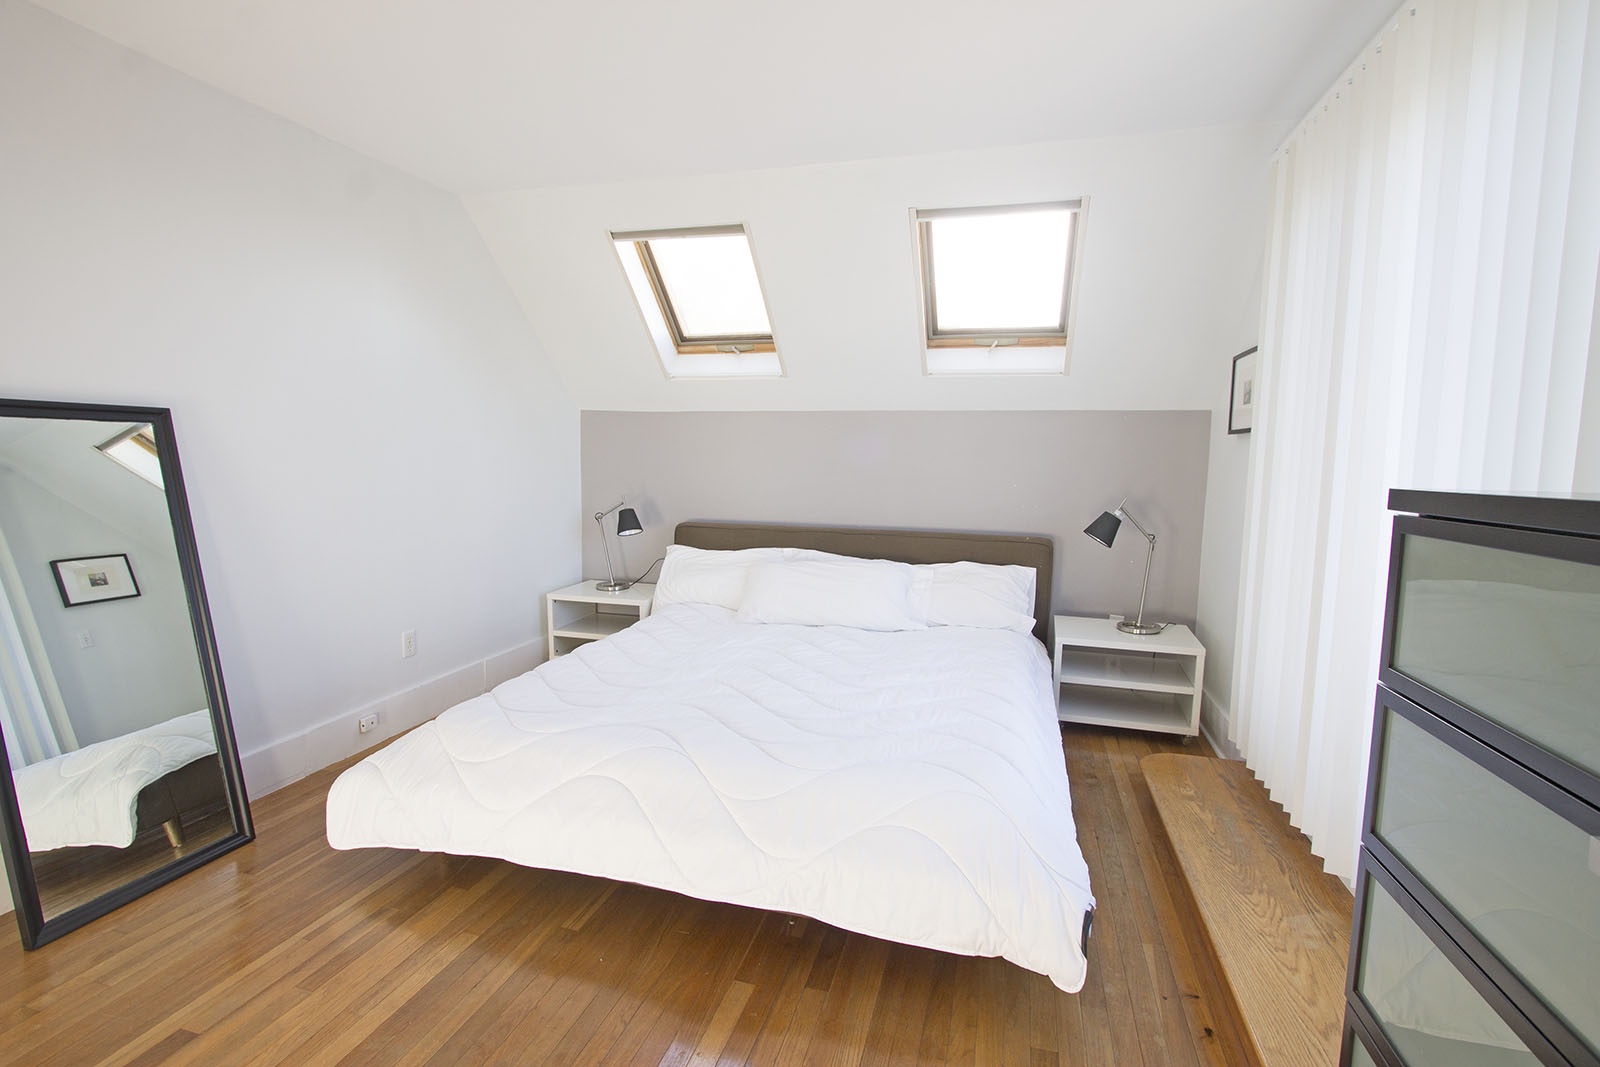 BR 1: Primary bedroom with skylights and sliders to a balcony.